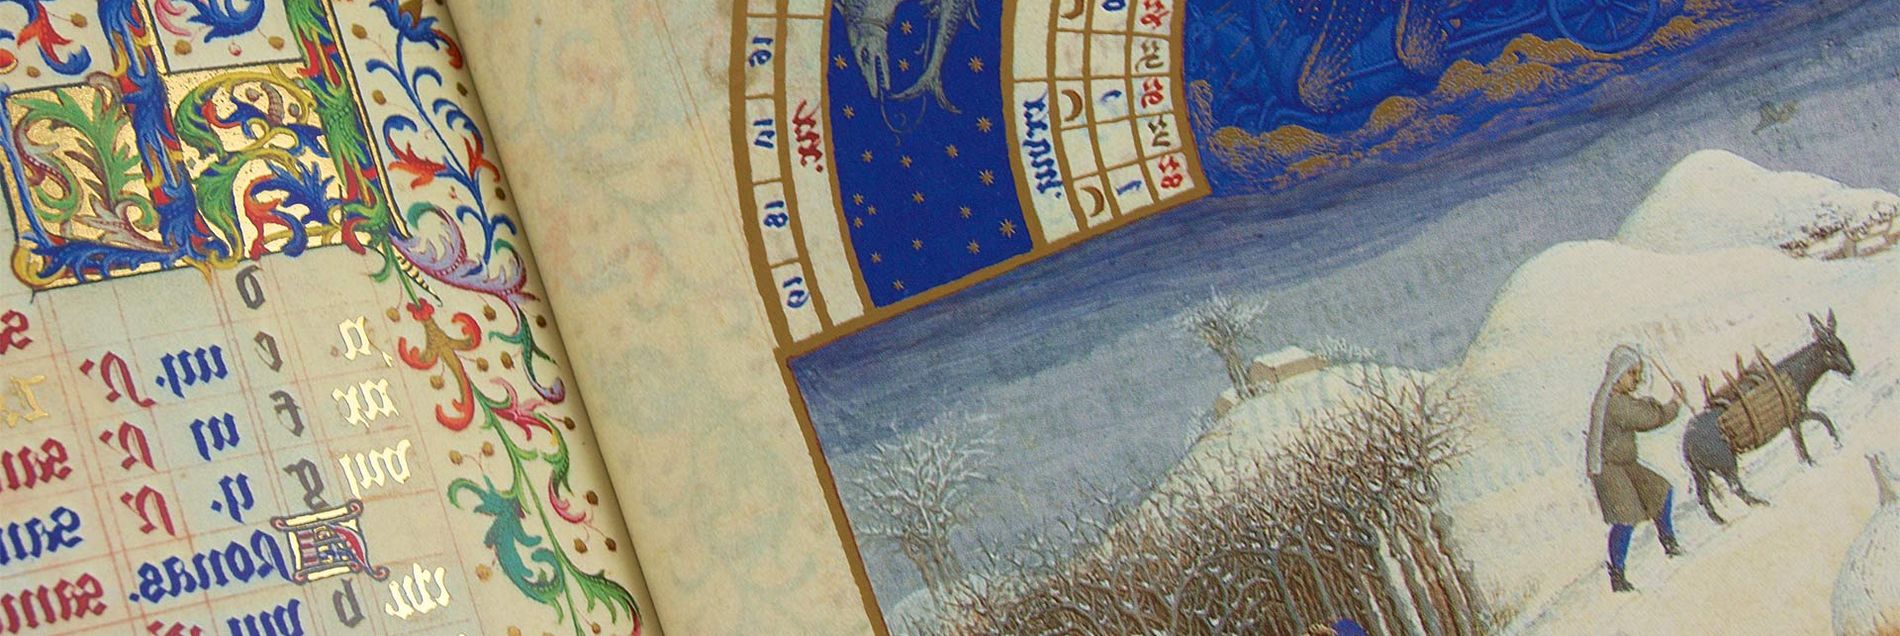 <i>“Our picture of the Middle Ages, created by the Limbourg brothers for the Duke of Berry”</i>